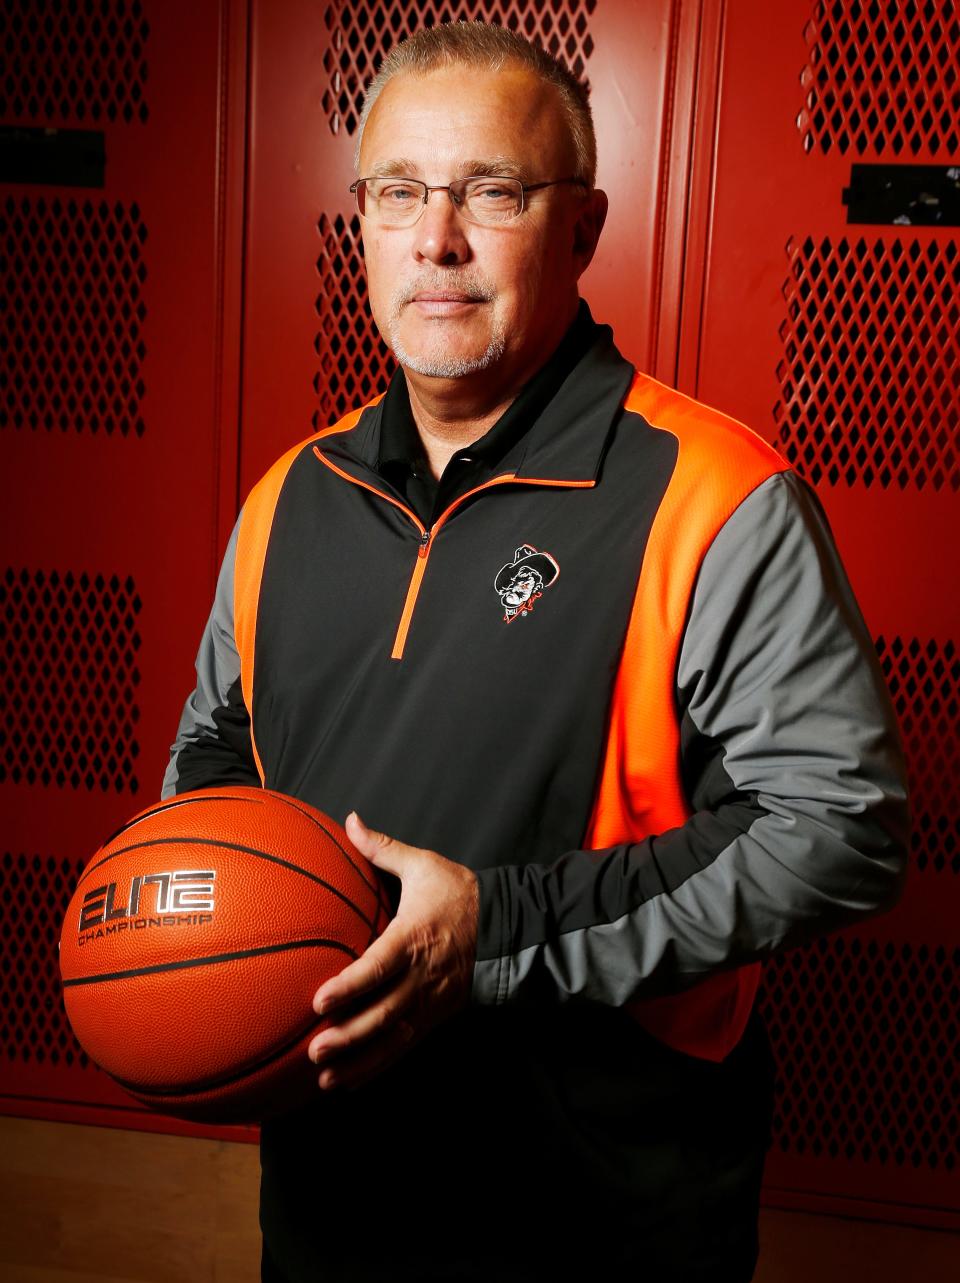 Jim Littell has an overall record of 203-139, trailing only Dick Halterman’s 333 victories as the most in OSU women's basketball history.